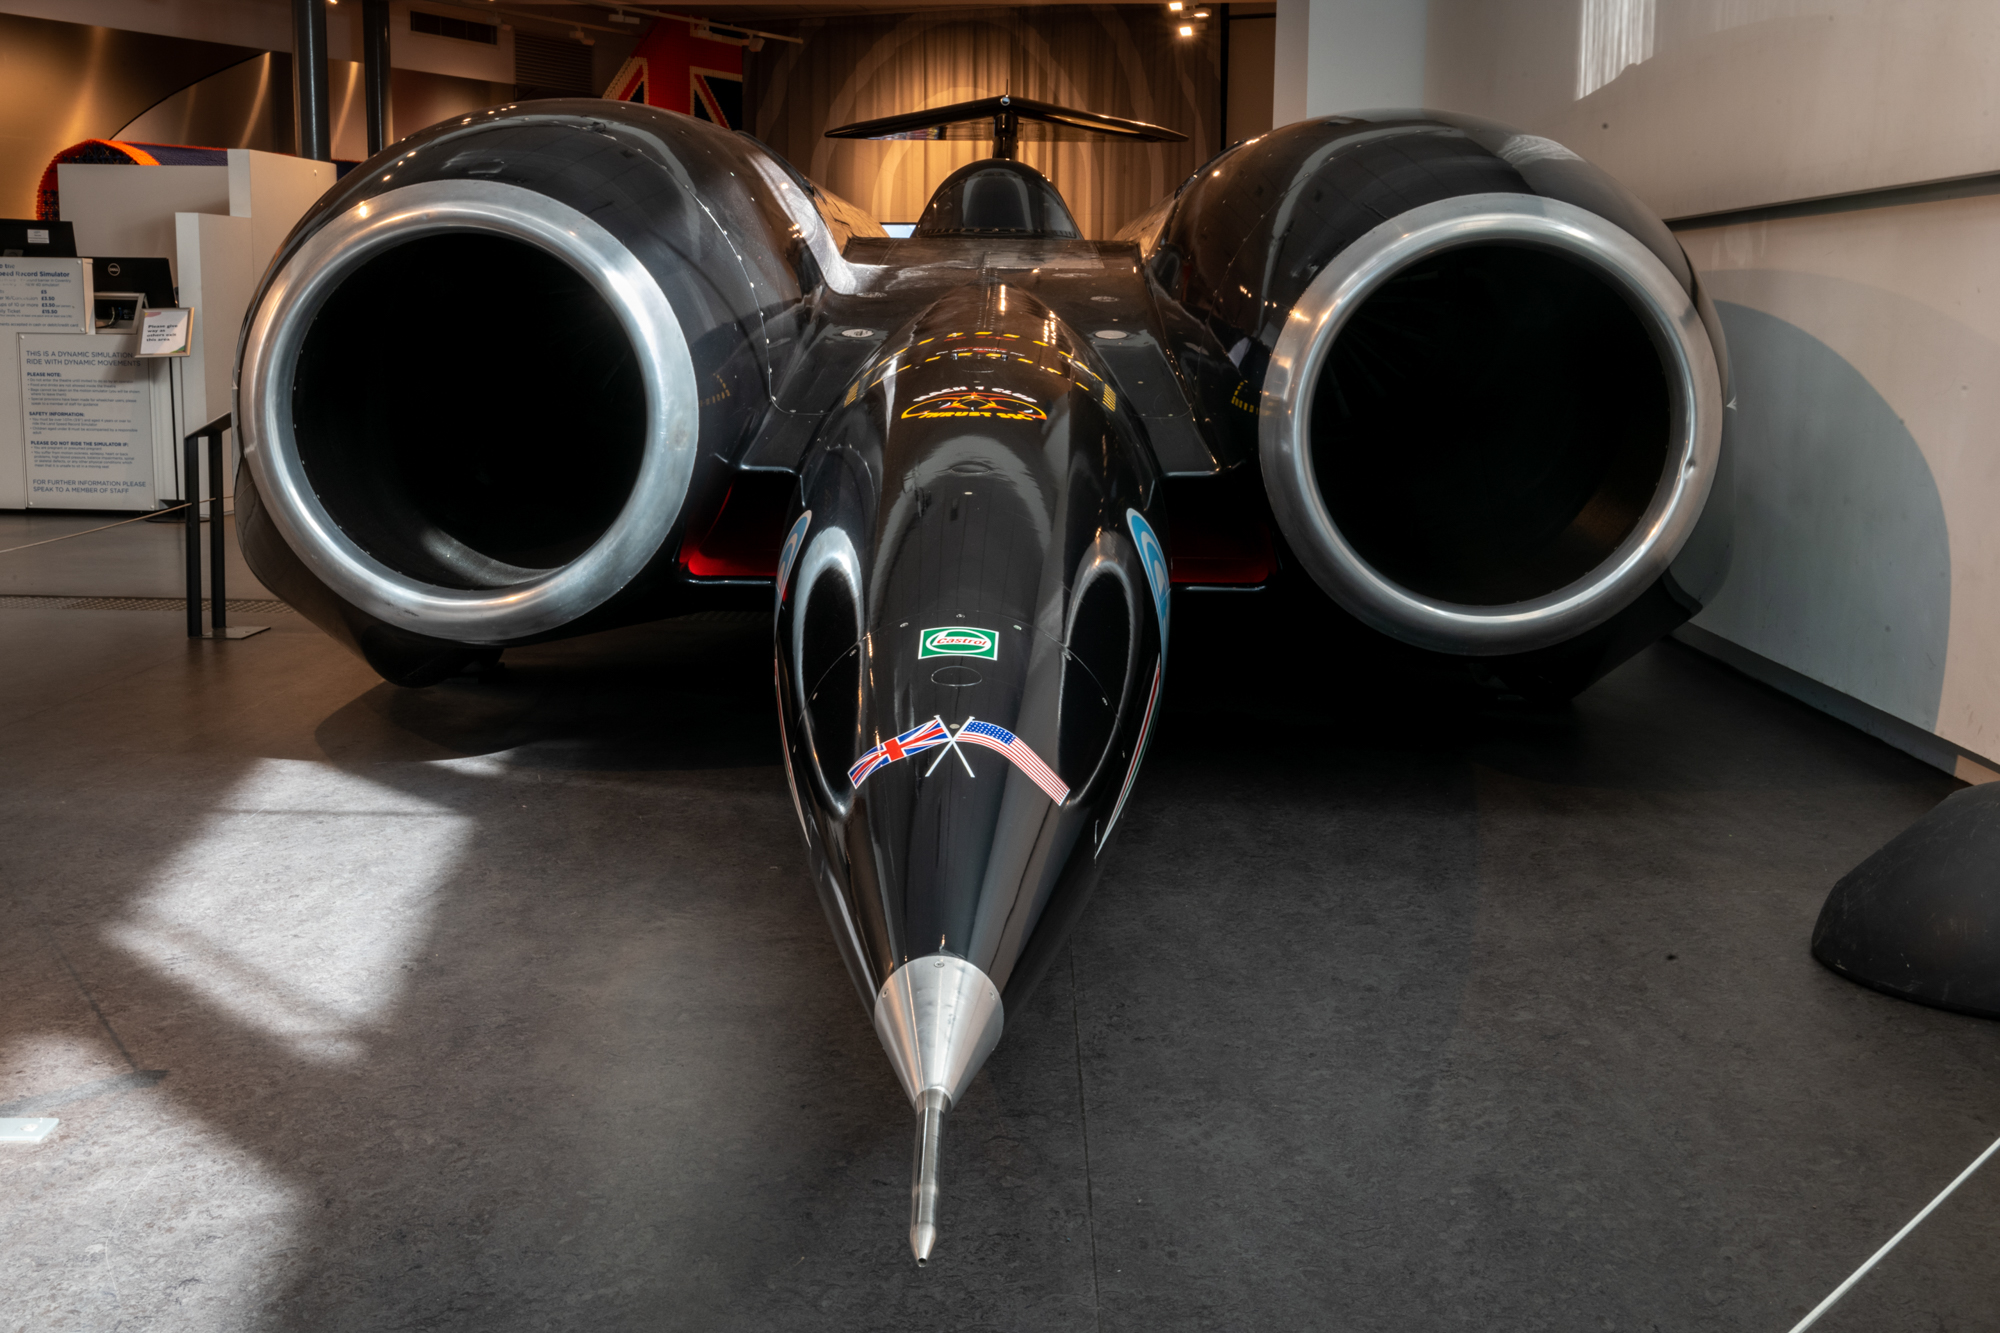 A front view of Thrust SSC on display in Coventry Transport Museum